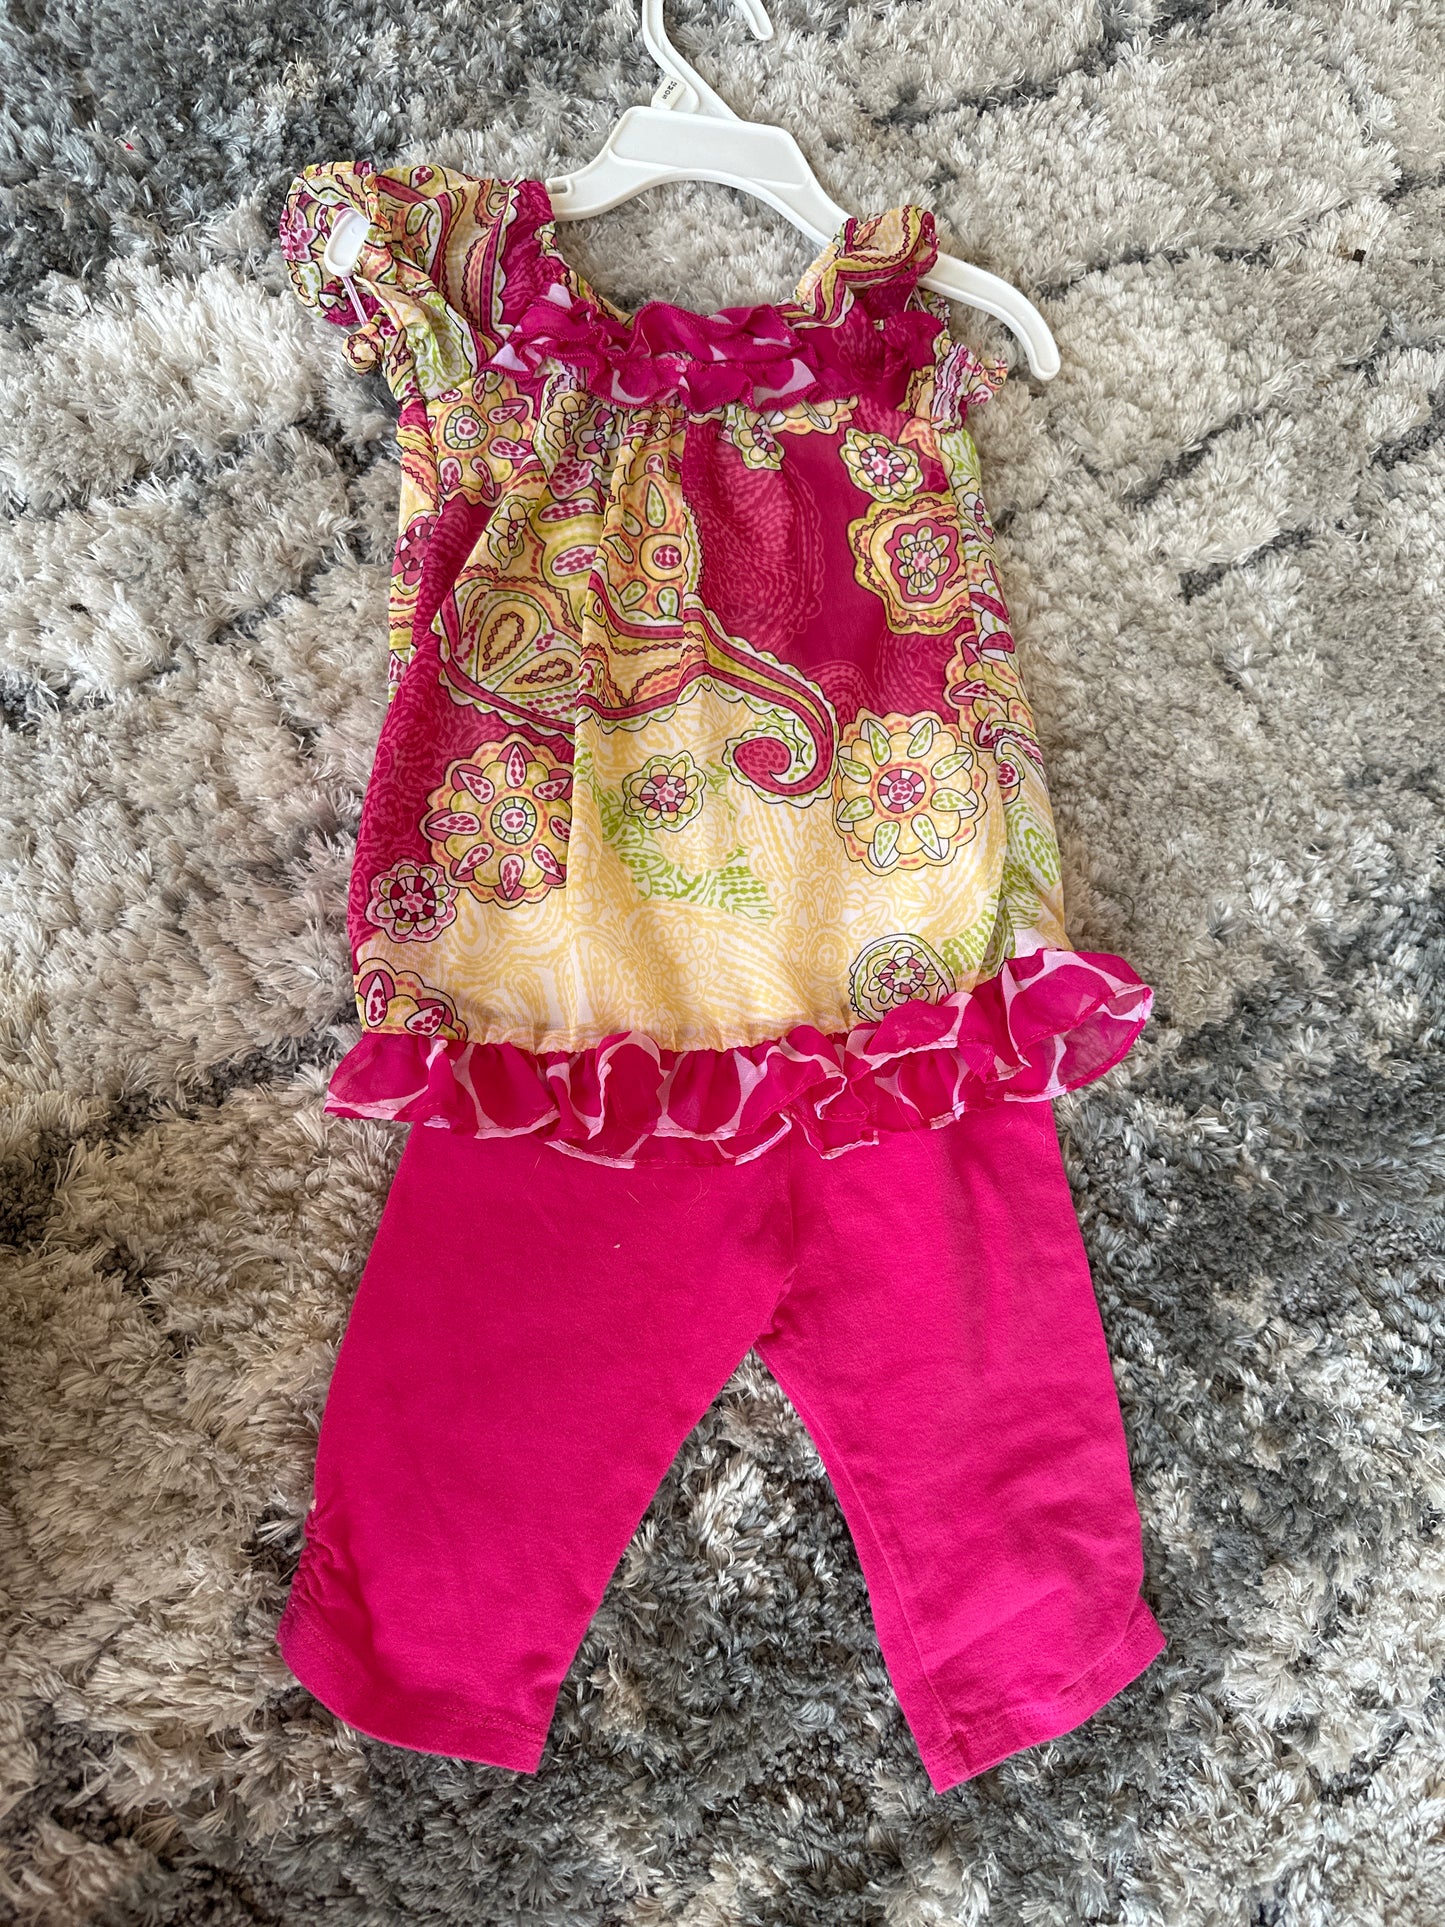 Pinky Girls Sz 12 months Outfit